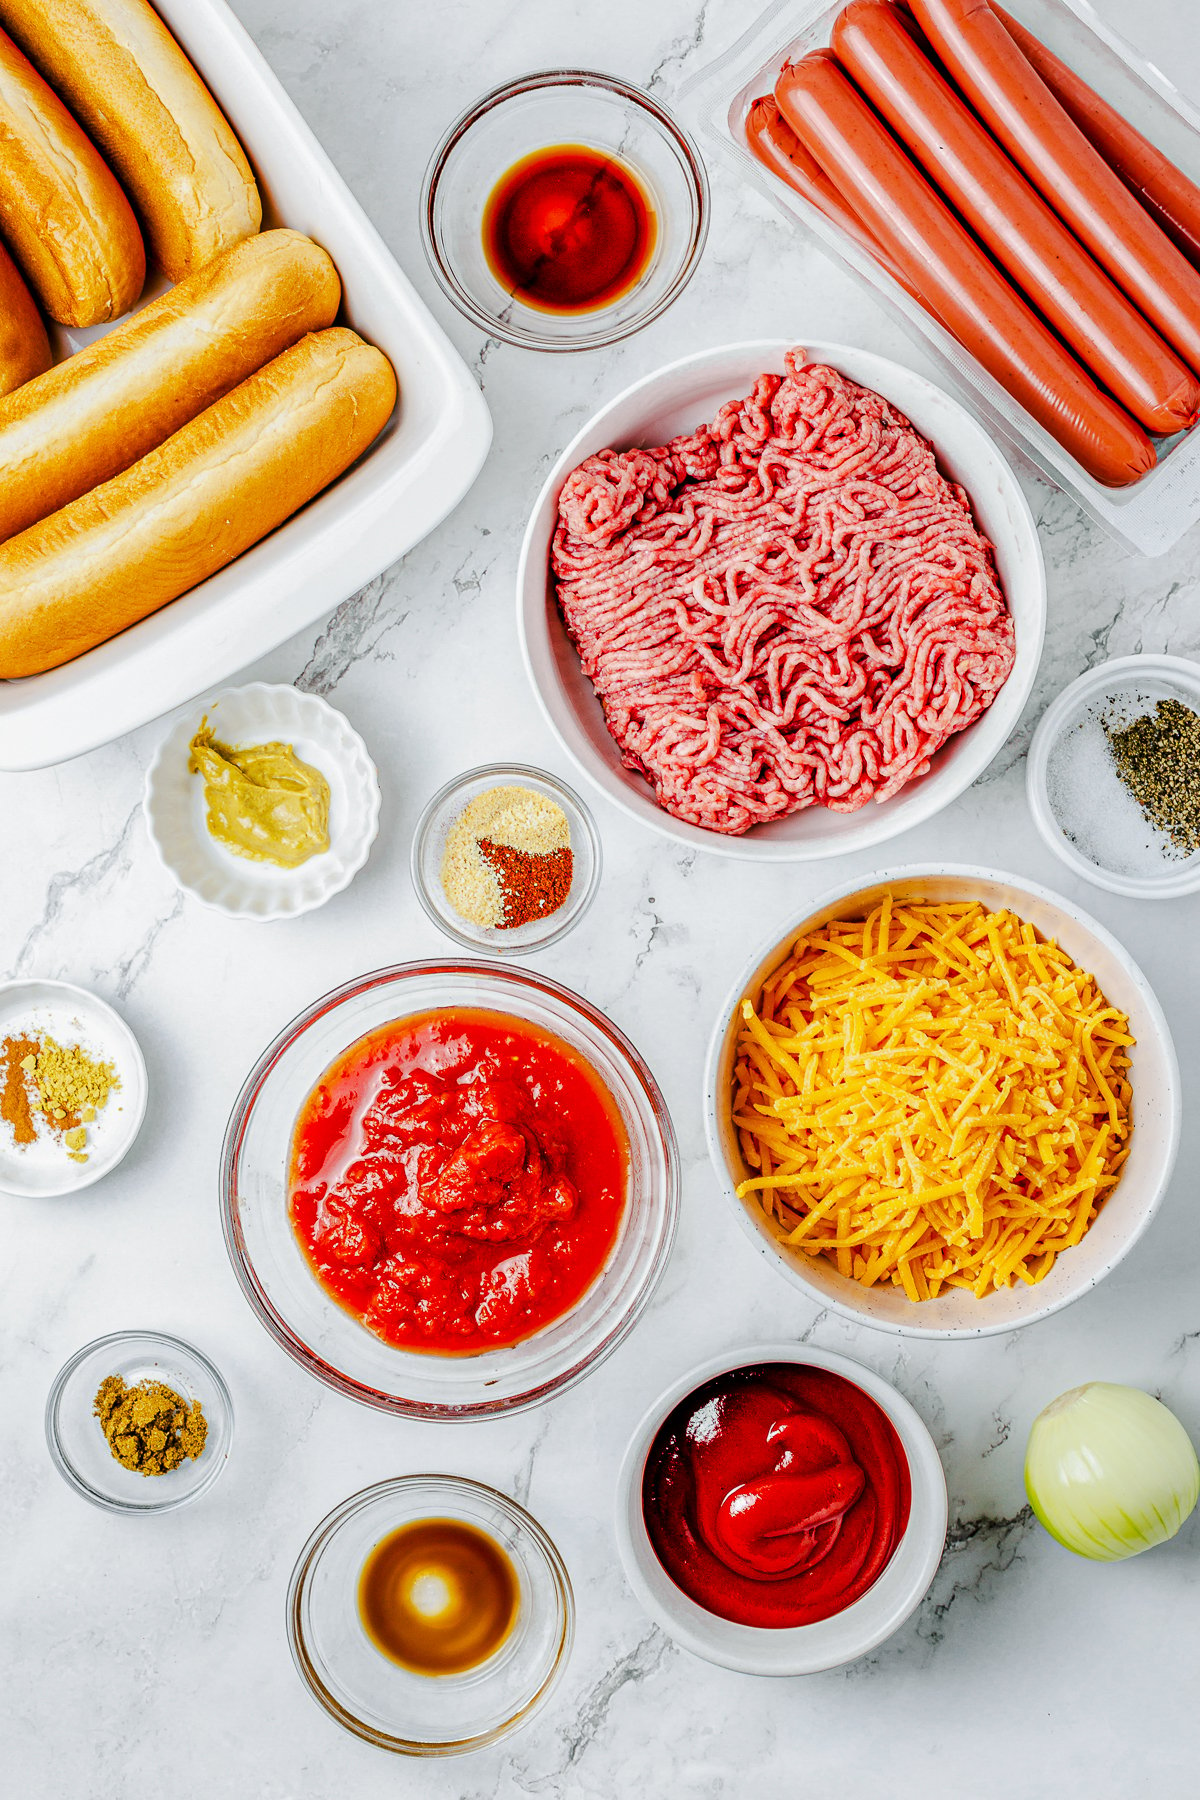 Ingredients needed to make Chili Cheese Dogs